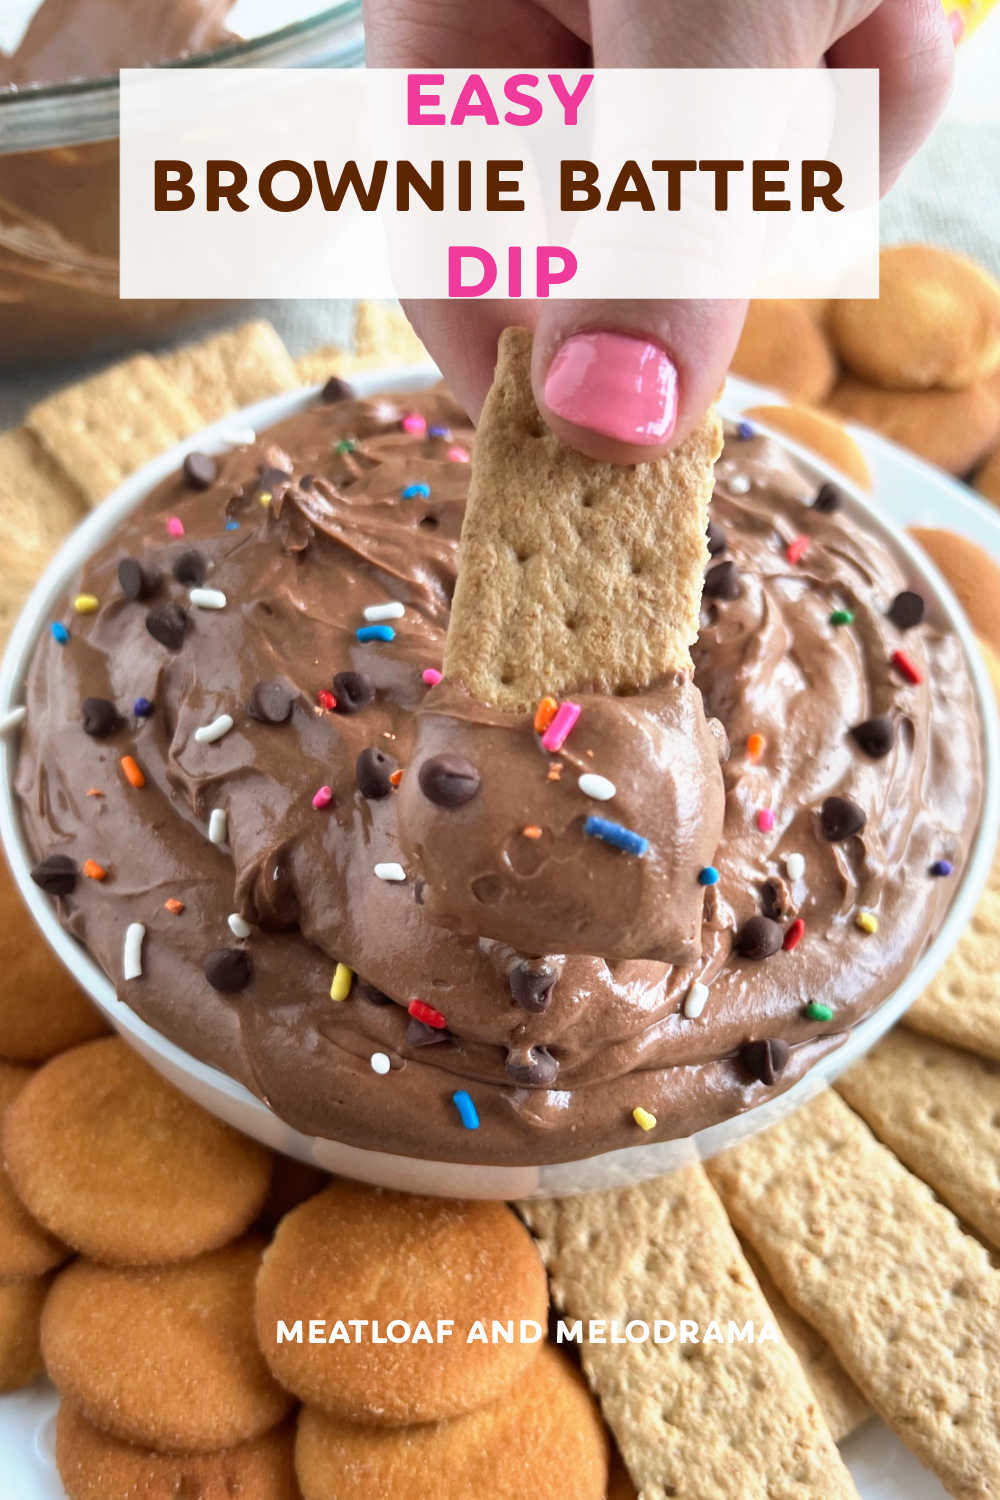 Brownie Batter Dip is an easy dessert dip that tastes like brownie batter. This no bake dessert recipe is rich, creamy and delicious! Enjoy this chocolate dip for holidays, birthday parties or baby showers! via @meamel